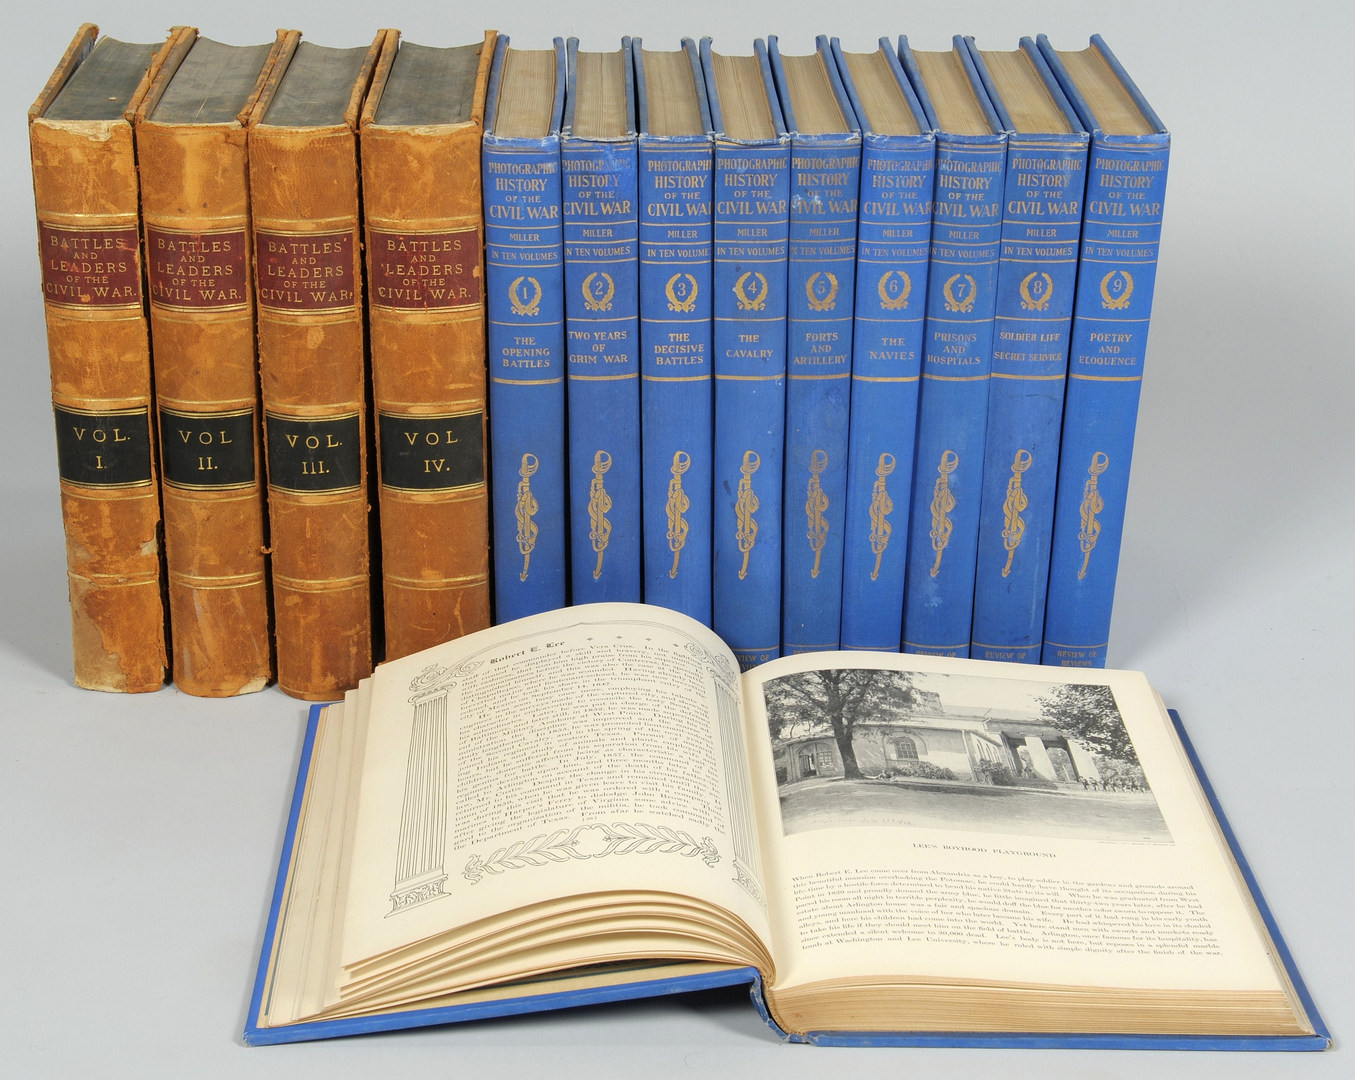 Lot 257: 14 Volumes of Civil War Related Books